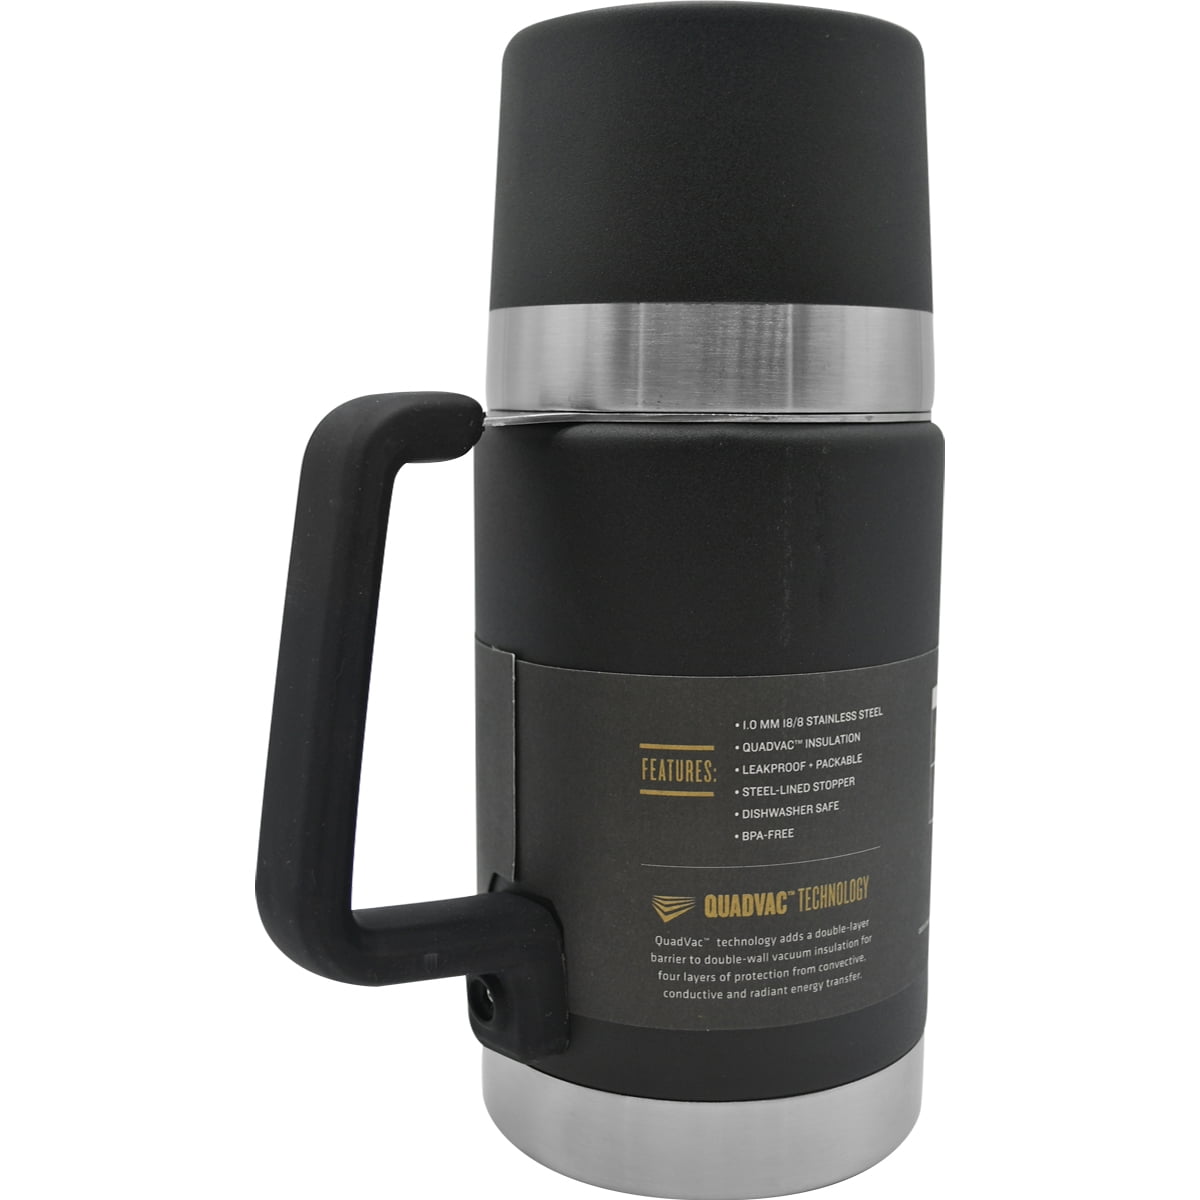 Stanley thermos on sale, can shelter your beverages from an indifferent  universe